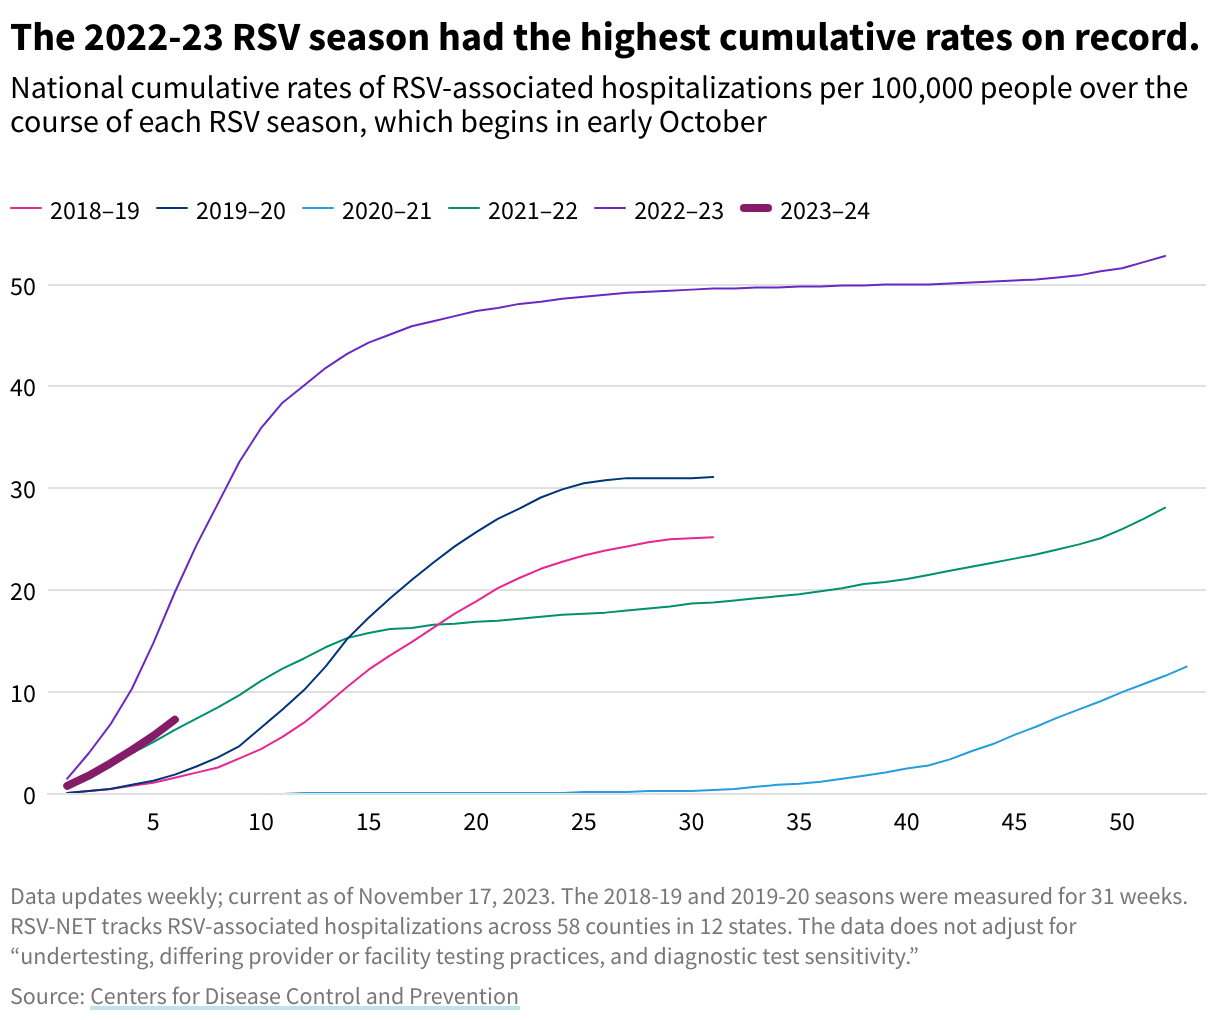 A line chart showing the national cumulative rates of RSV-associated hospitalizations per 100,000 people over the course of each winter since 2018. The 2022–23 season had the highest cumulative rates.